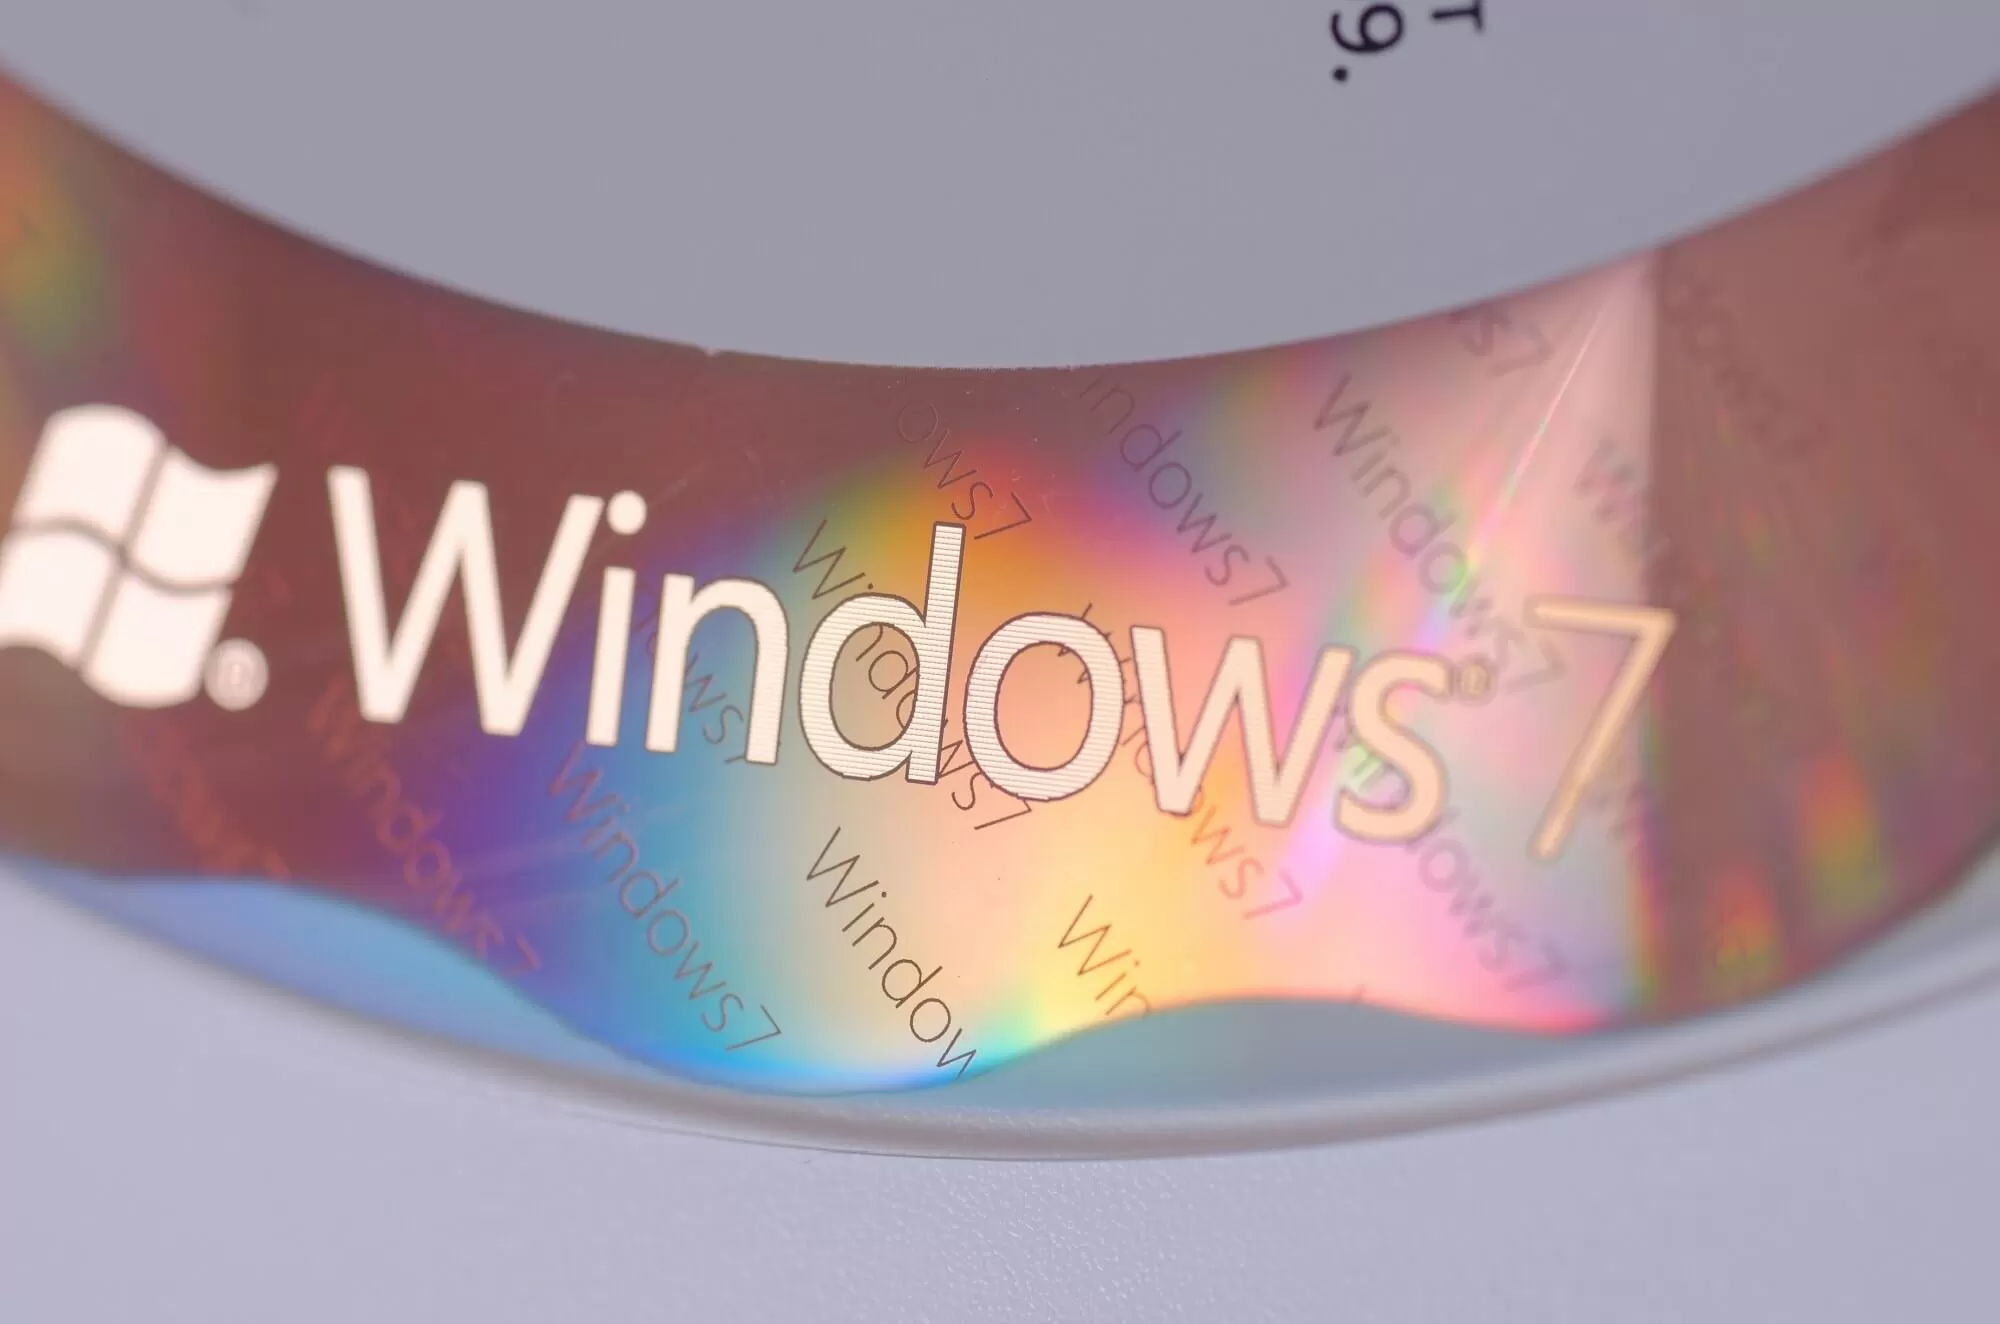 Google extends Chrome support for Windows 7 by six months